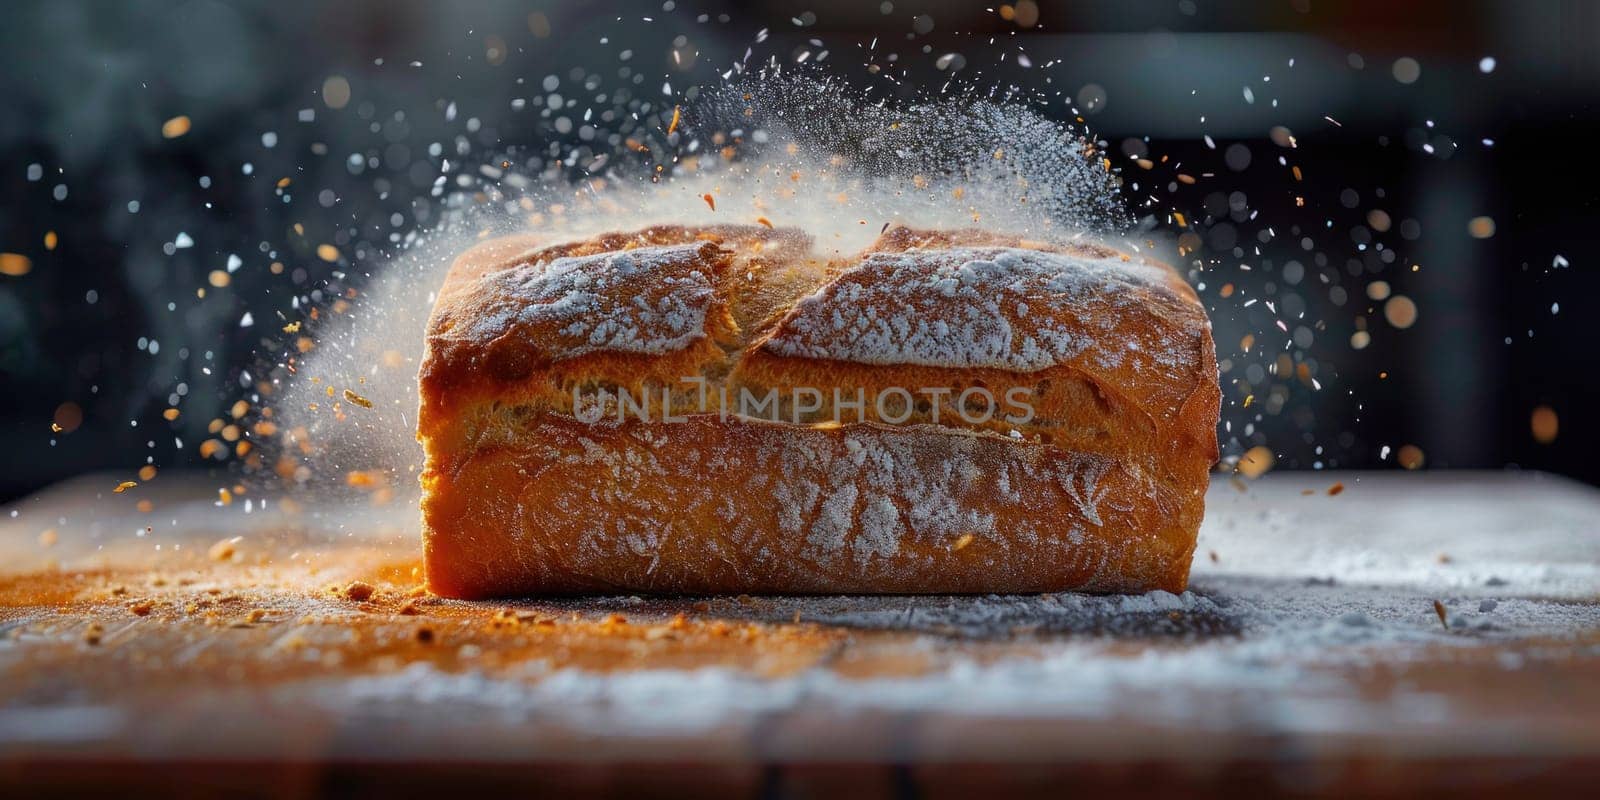 A loaf of bread being covered with a light dusting of powdered sugar by a pair of hands.